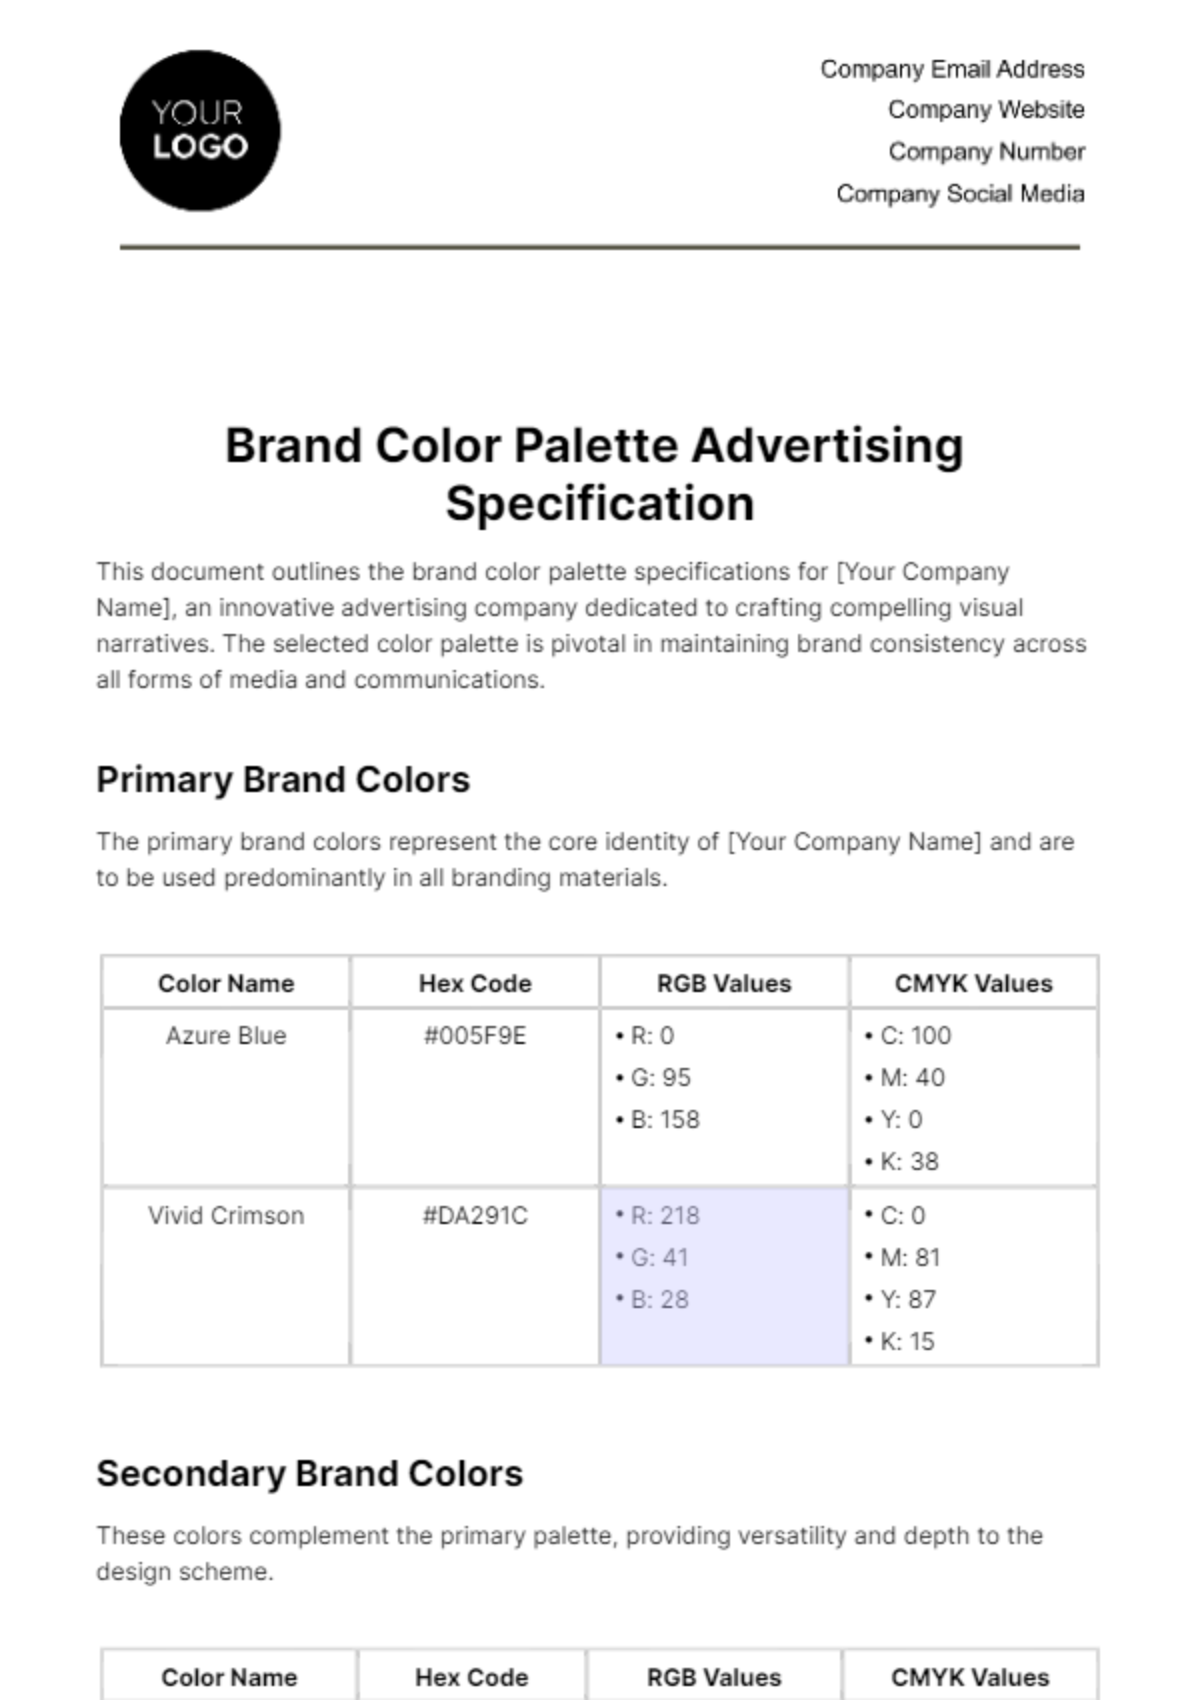 Free Brand Color Palette Advertising Specification Template